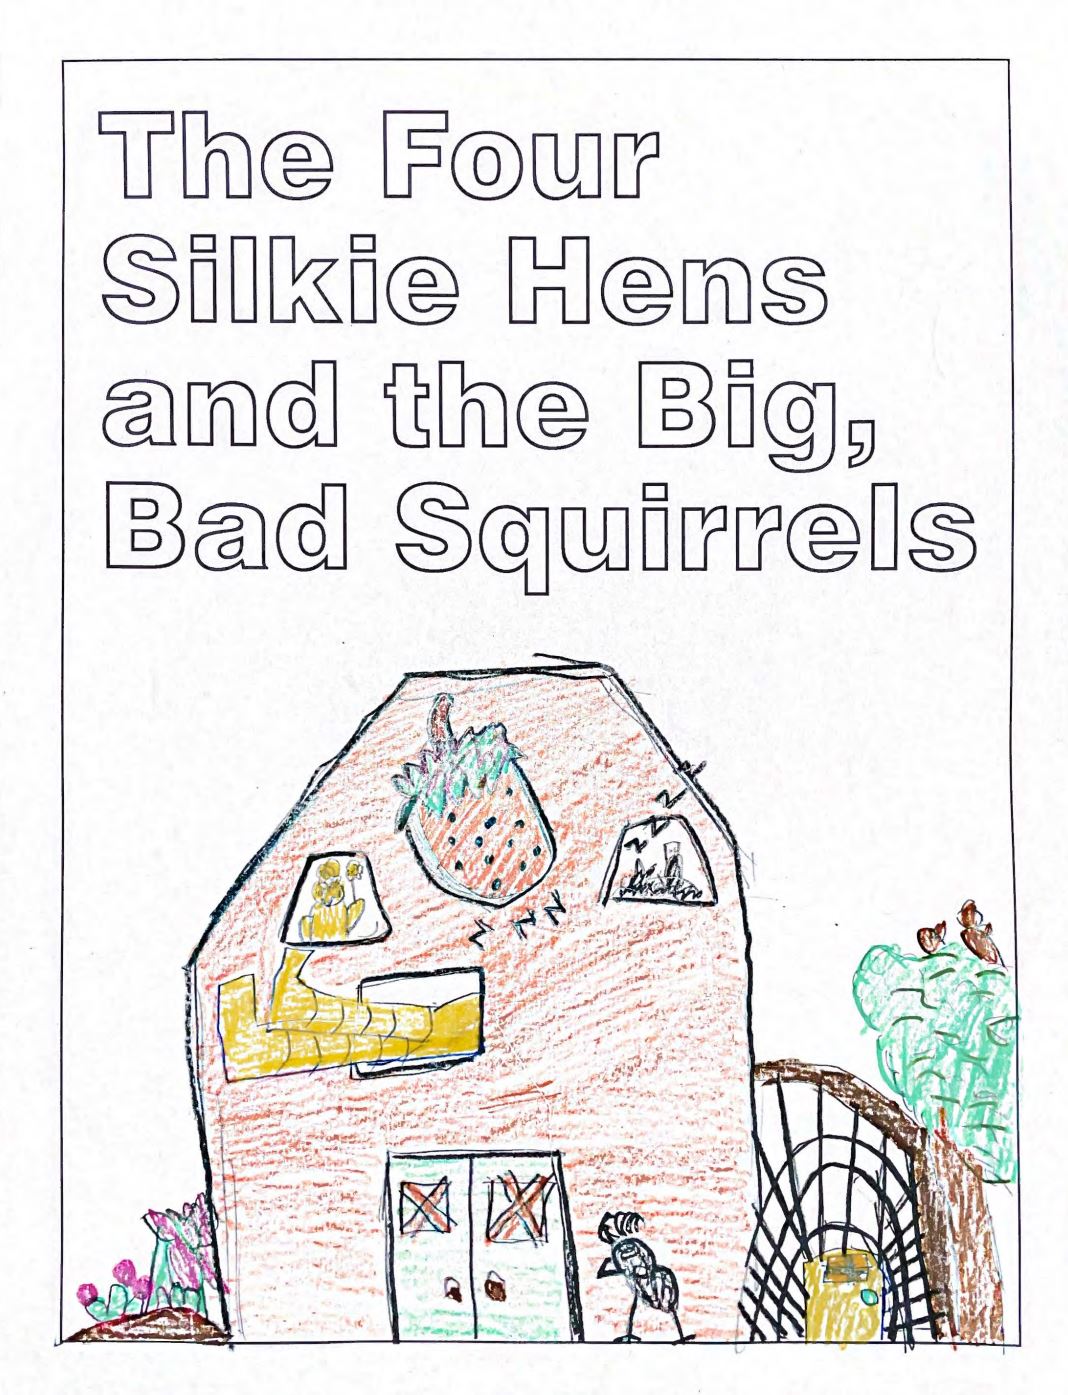 The Four Silkie Hens and the Big, Bad Squirrels by Edgar V.